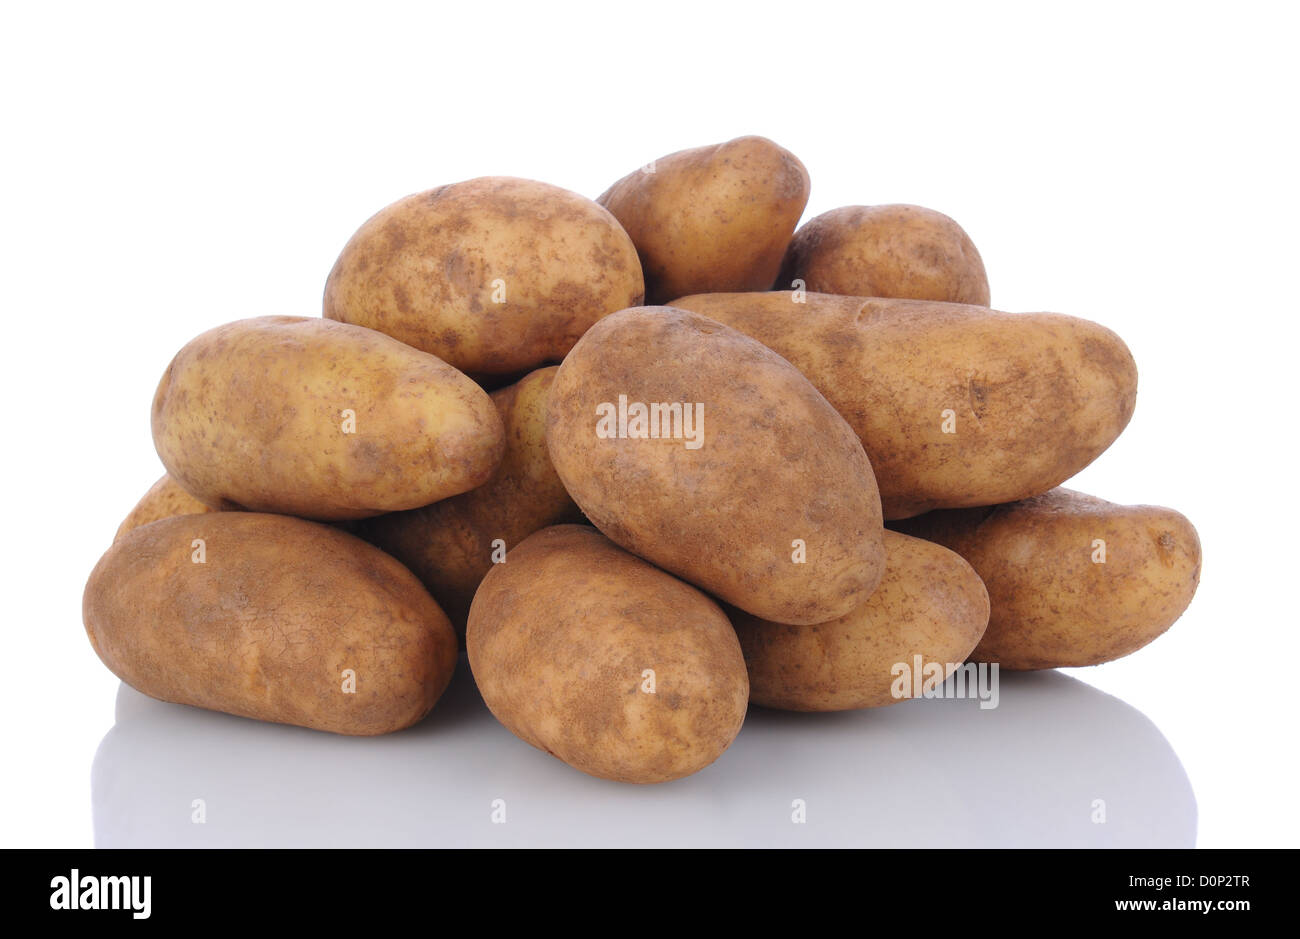 Closeup of a pile of russet potatoes on a white surface with reflection. Horizontal format. Stock Photo